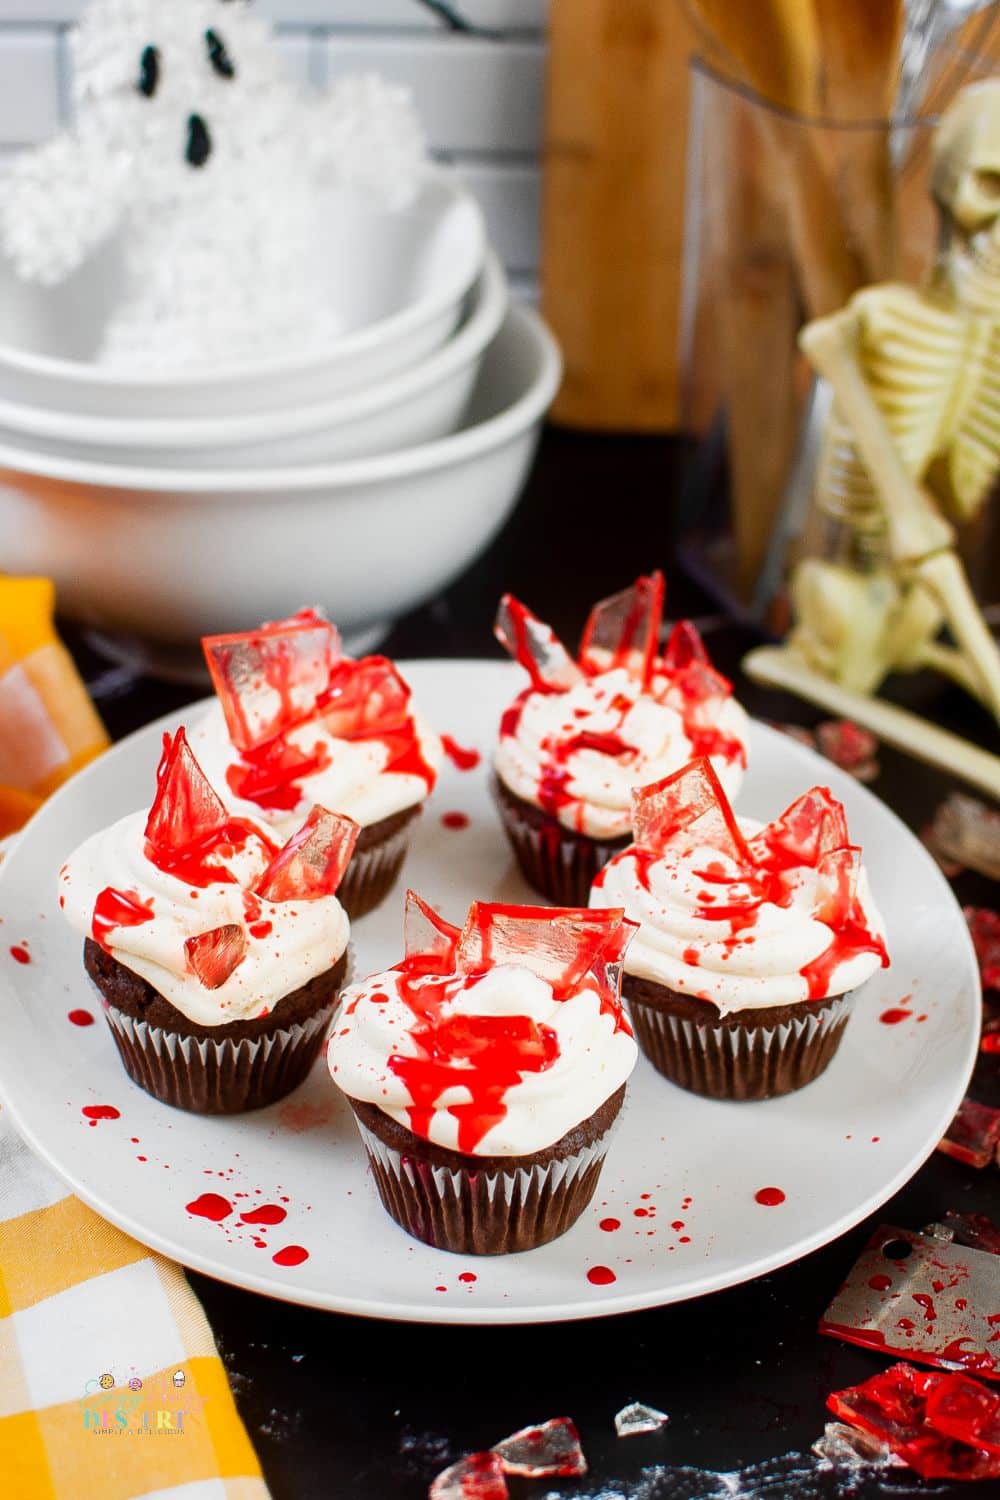 Bloody glass cupcakes for Halloween